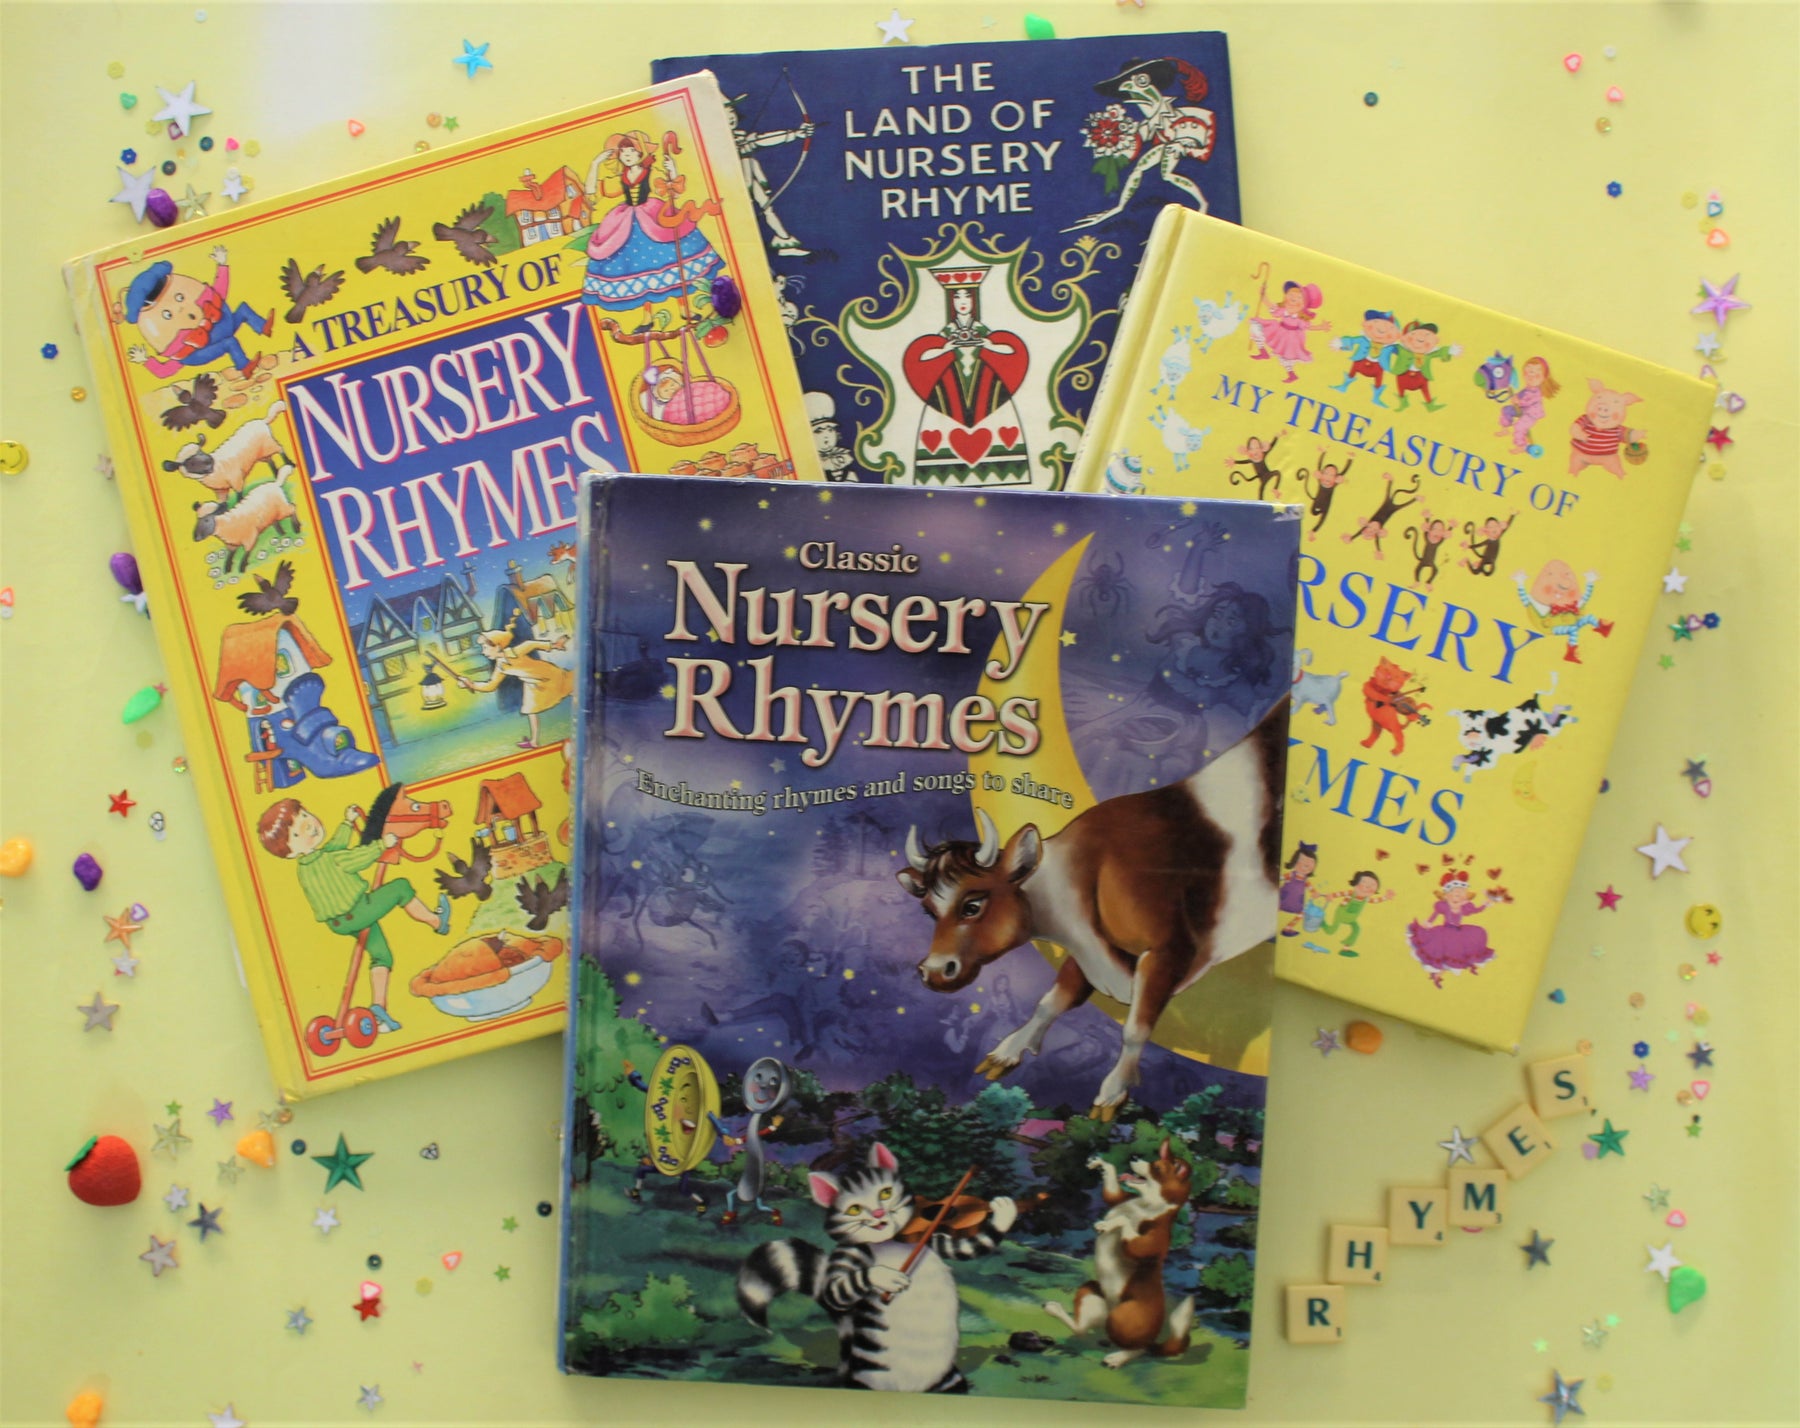 5 Ways Nursery Rhymes Benefit Your Child's Growth and Development.